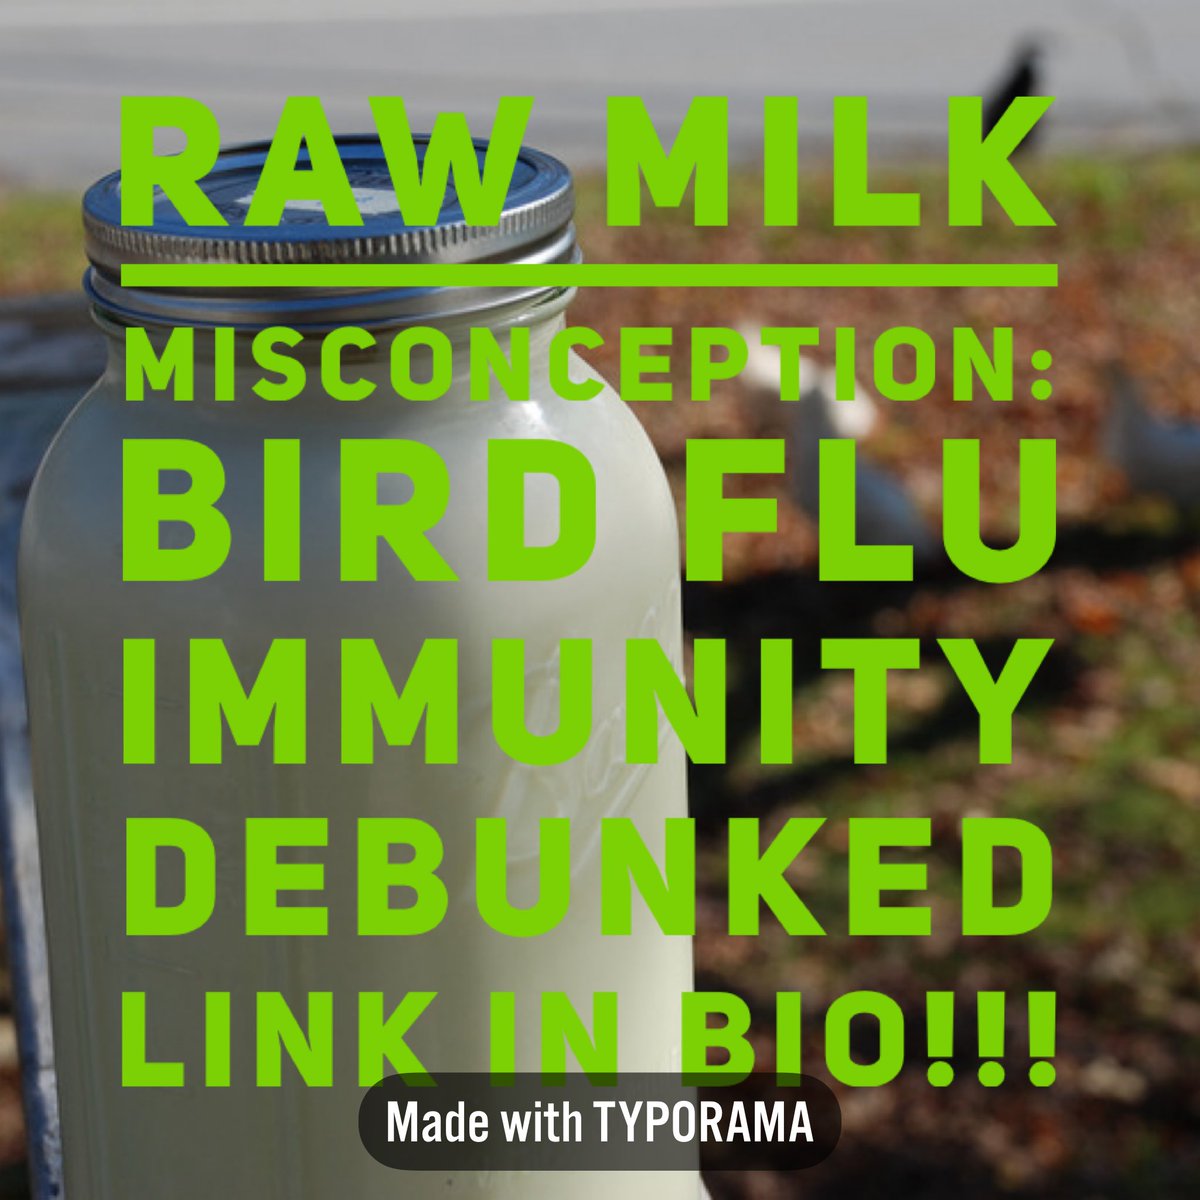 LIKE, COMMENT, SUBSCRIBE & SHARE!!!

#RawMilkMyths #FoodMisconceptions #RawDairyDebate #UnpasteurizedTruths #RawMilkTruths #teamtaytay🇧🇧#EducateYourself #HealthyChoices #RawDairyFacts #RealFoodEducation #MilkMisconceptions #RawMilkAwareness #HealthyLivingTips #MythsVsFacts